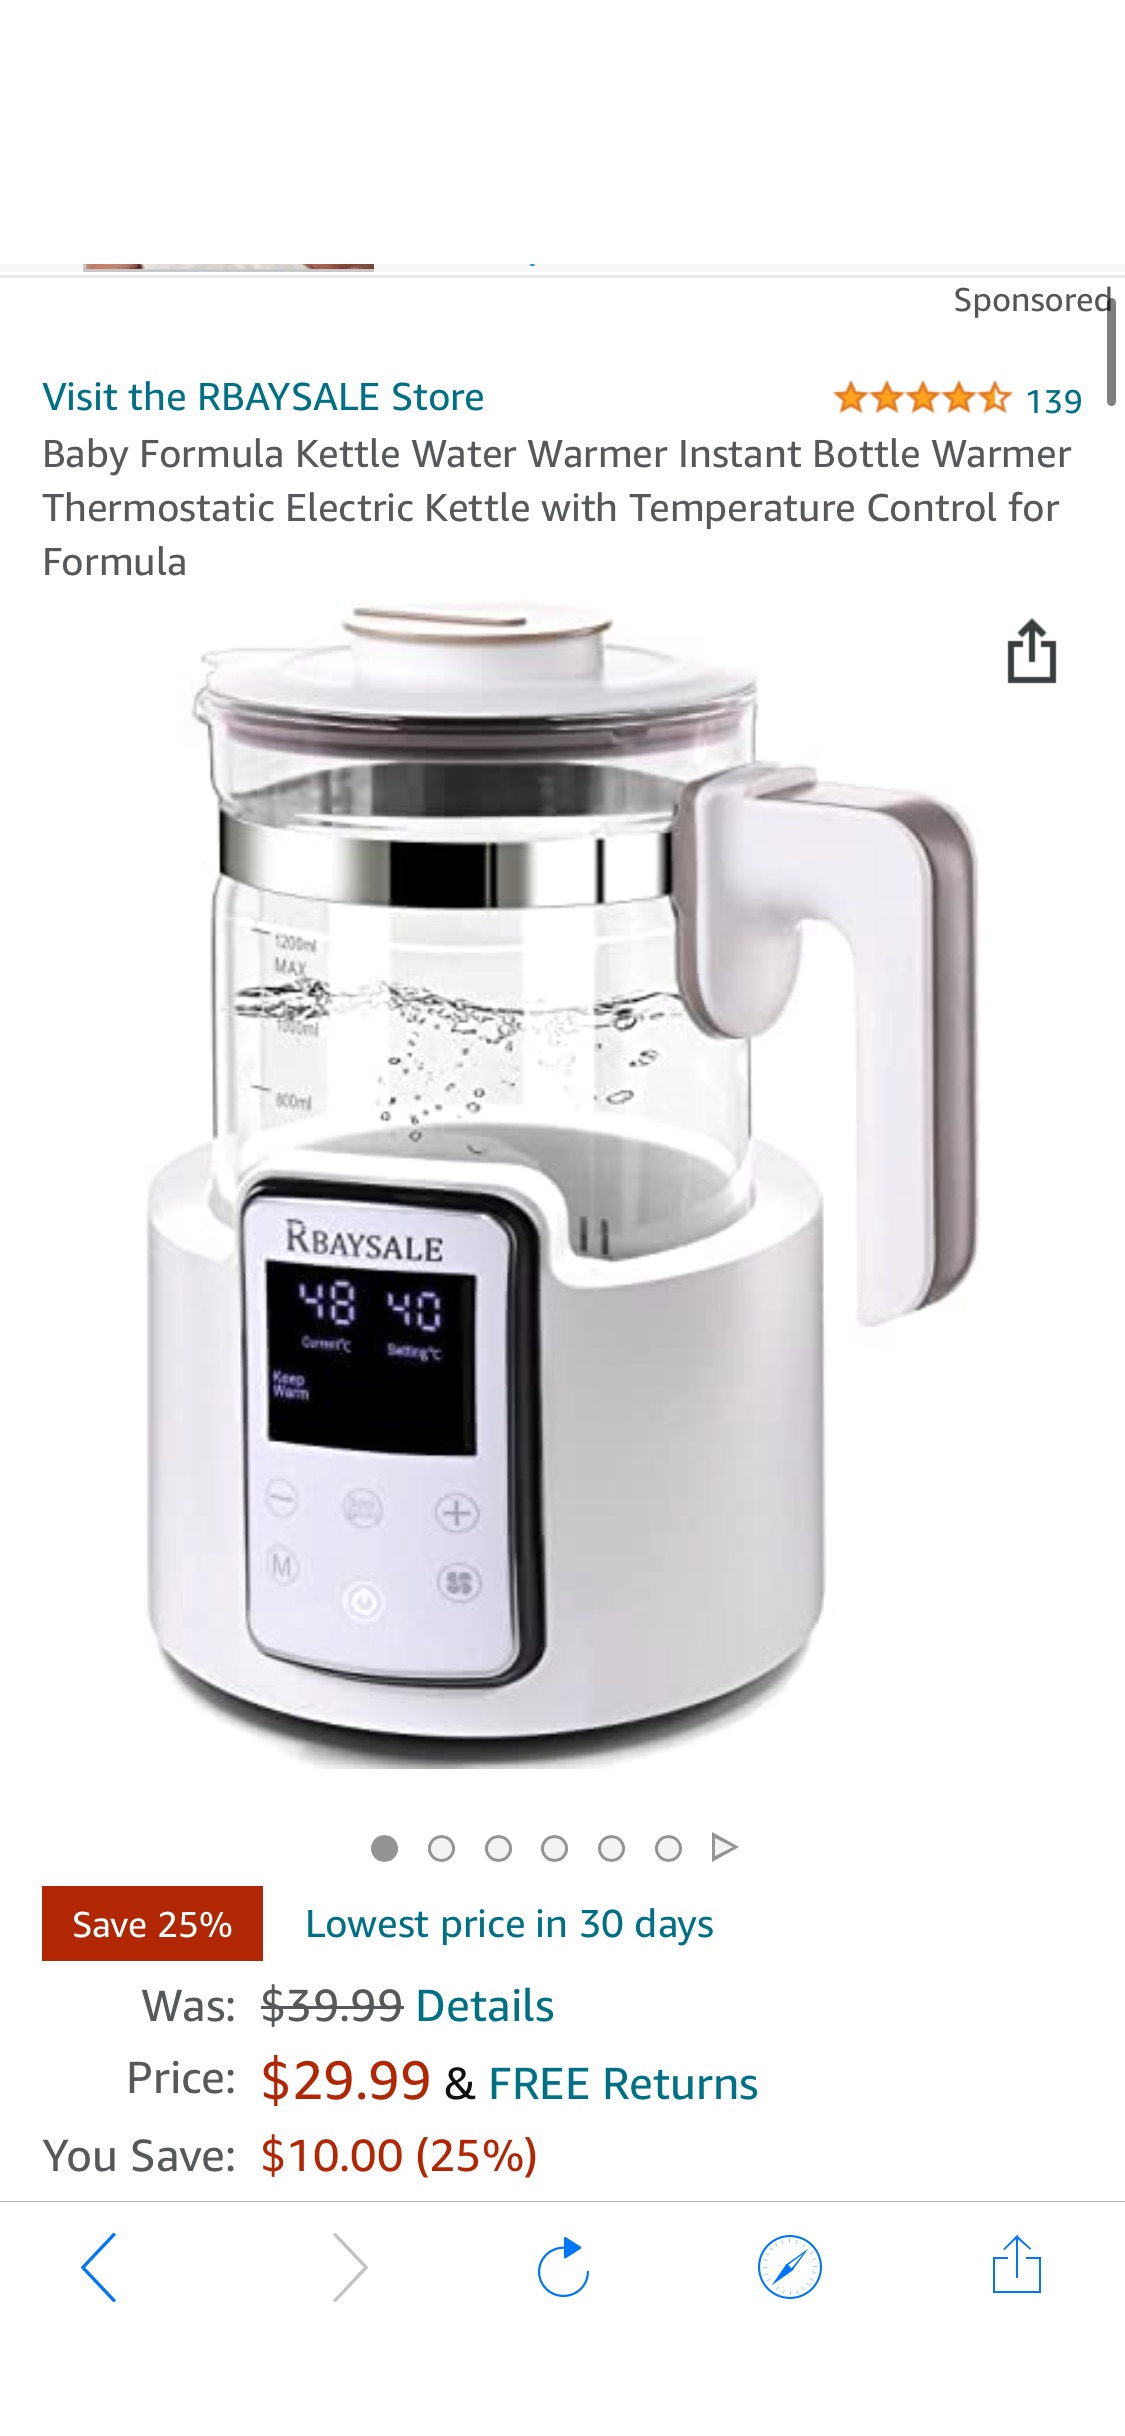 Amazon.com : Baby Formula Kettle Water Warmer Instant Bottle Warmer Thermostatic Electric Kettle with Temperature Control for Formula :宝宝恒温壶